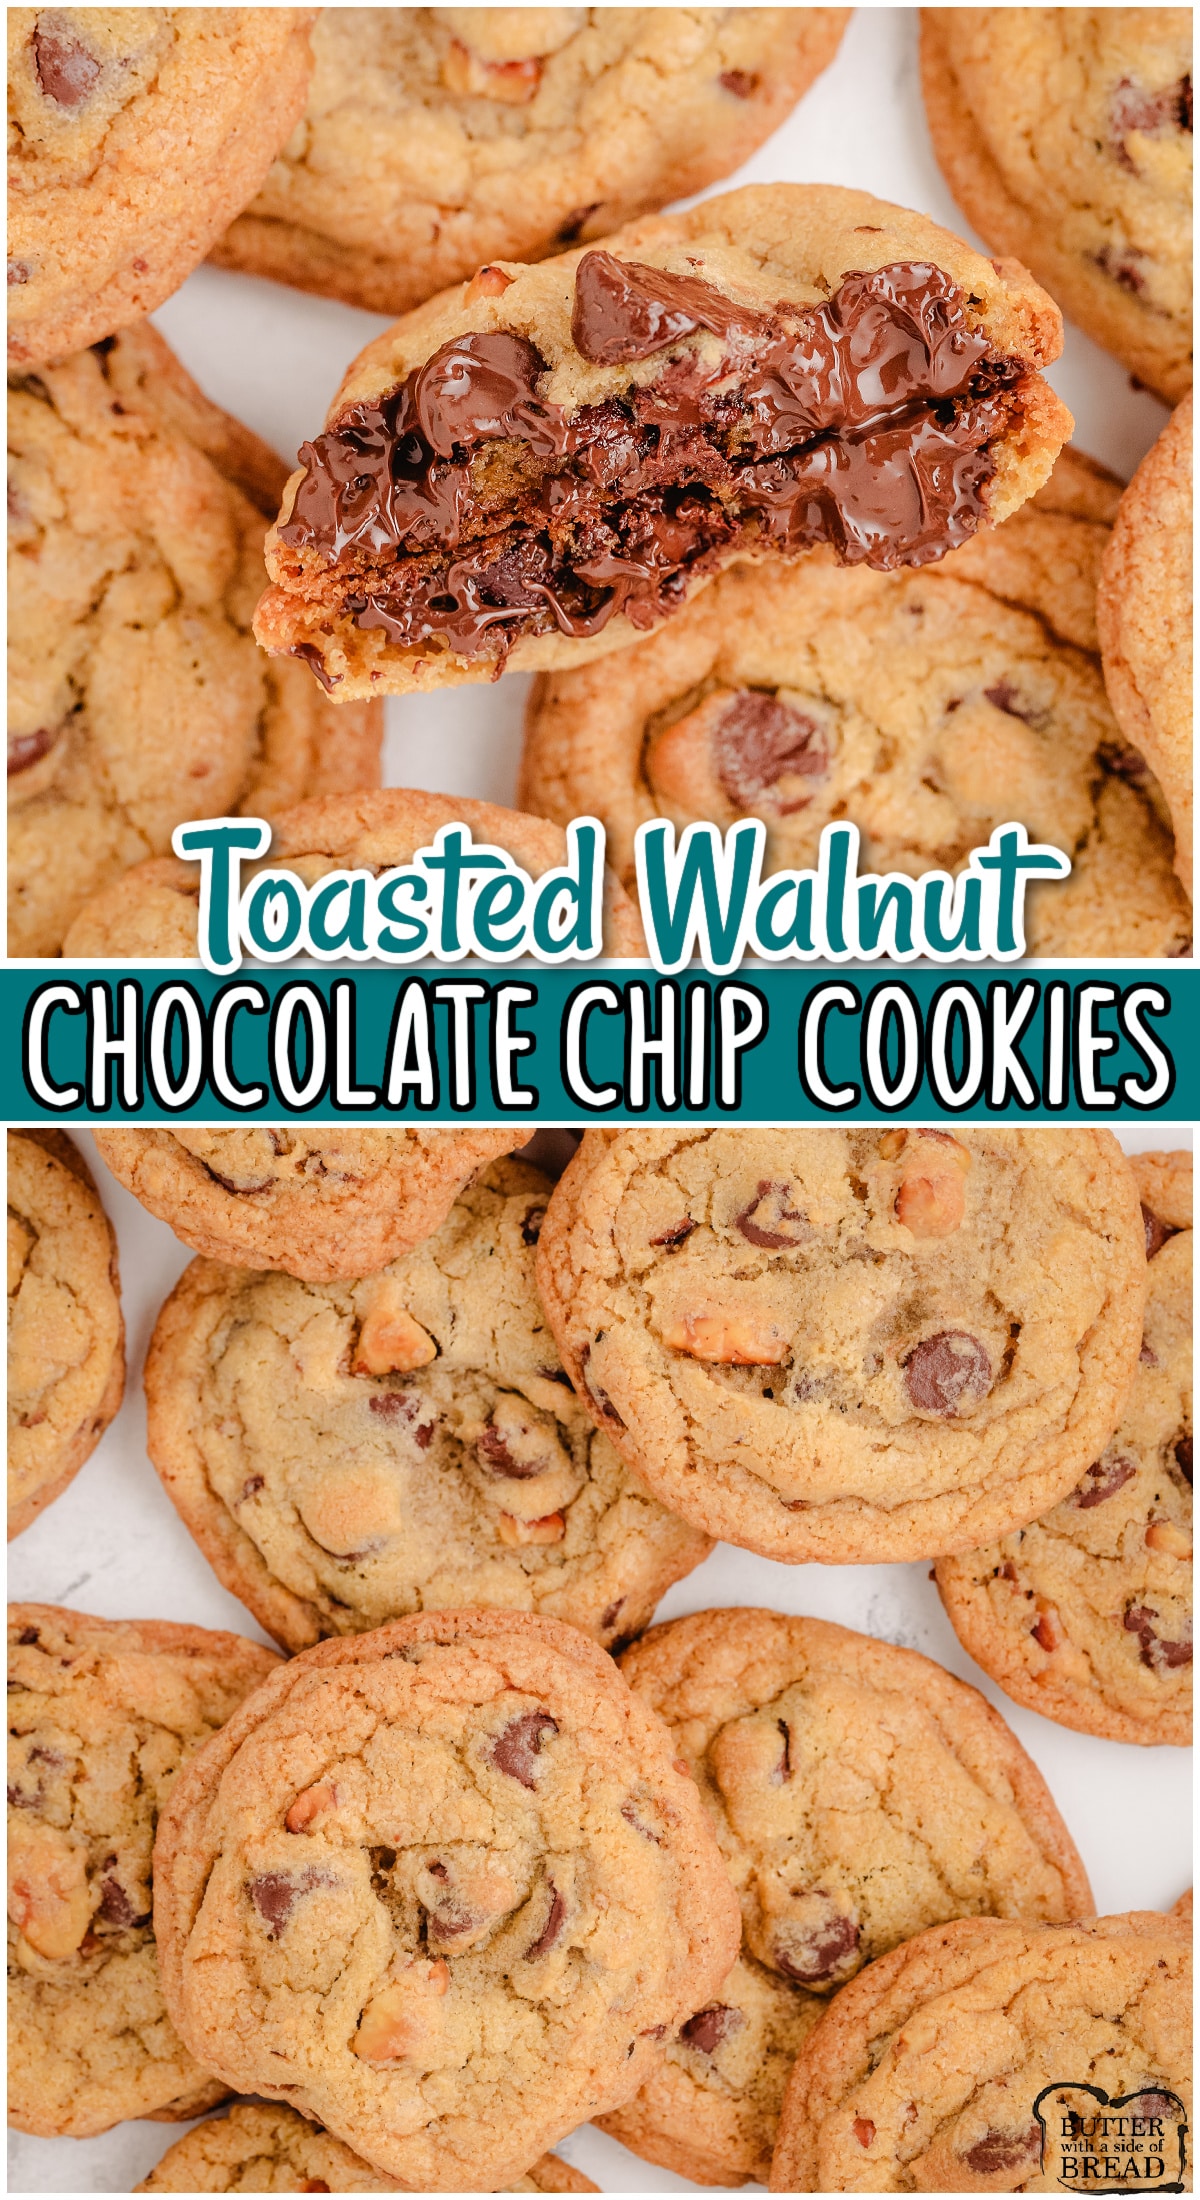 Toasted Walnut Chocolate Chip Cookies are a delicious twist on a classic recipe, with a lovely combination of sweet and nutty flavors!